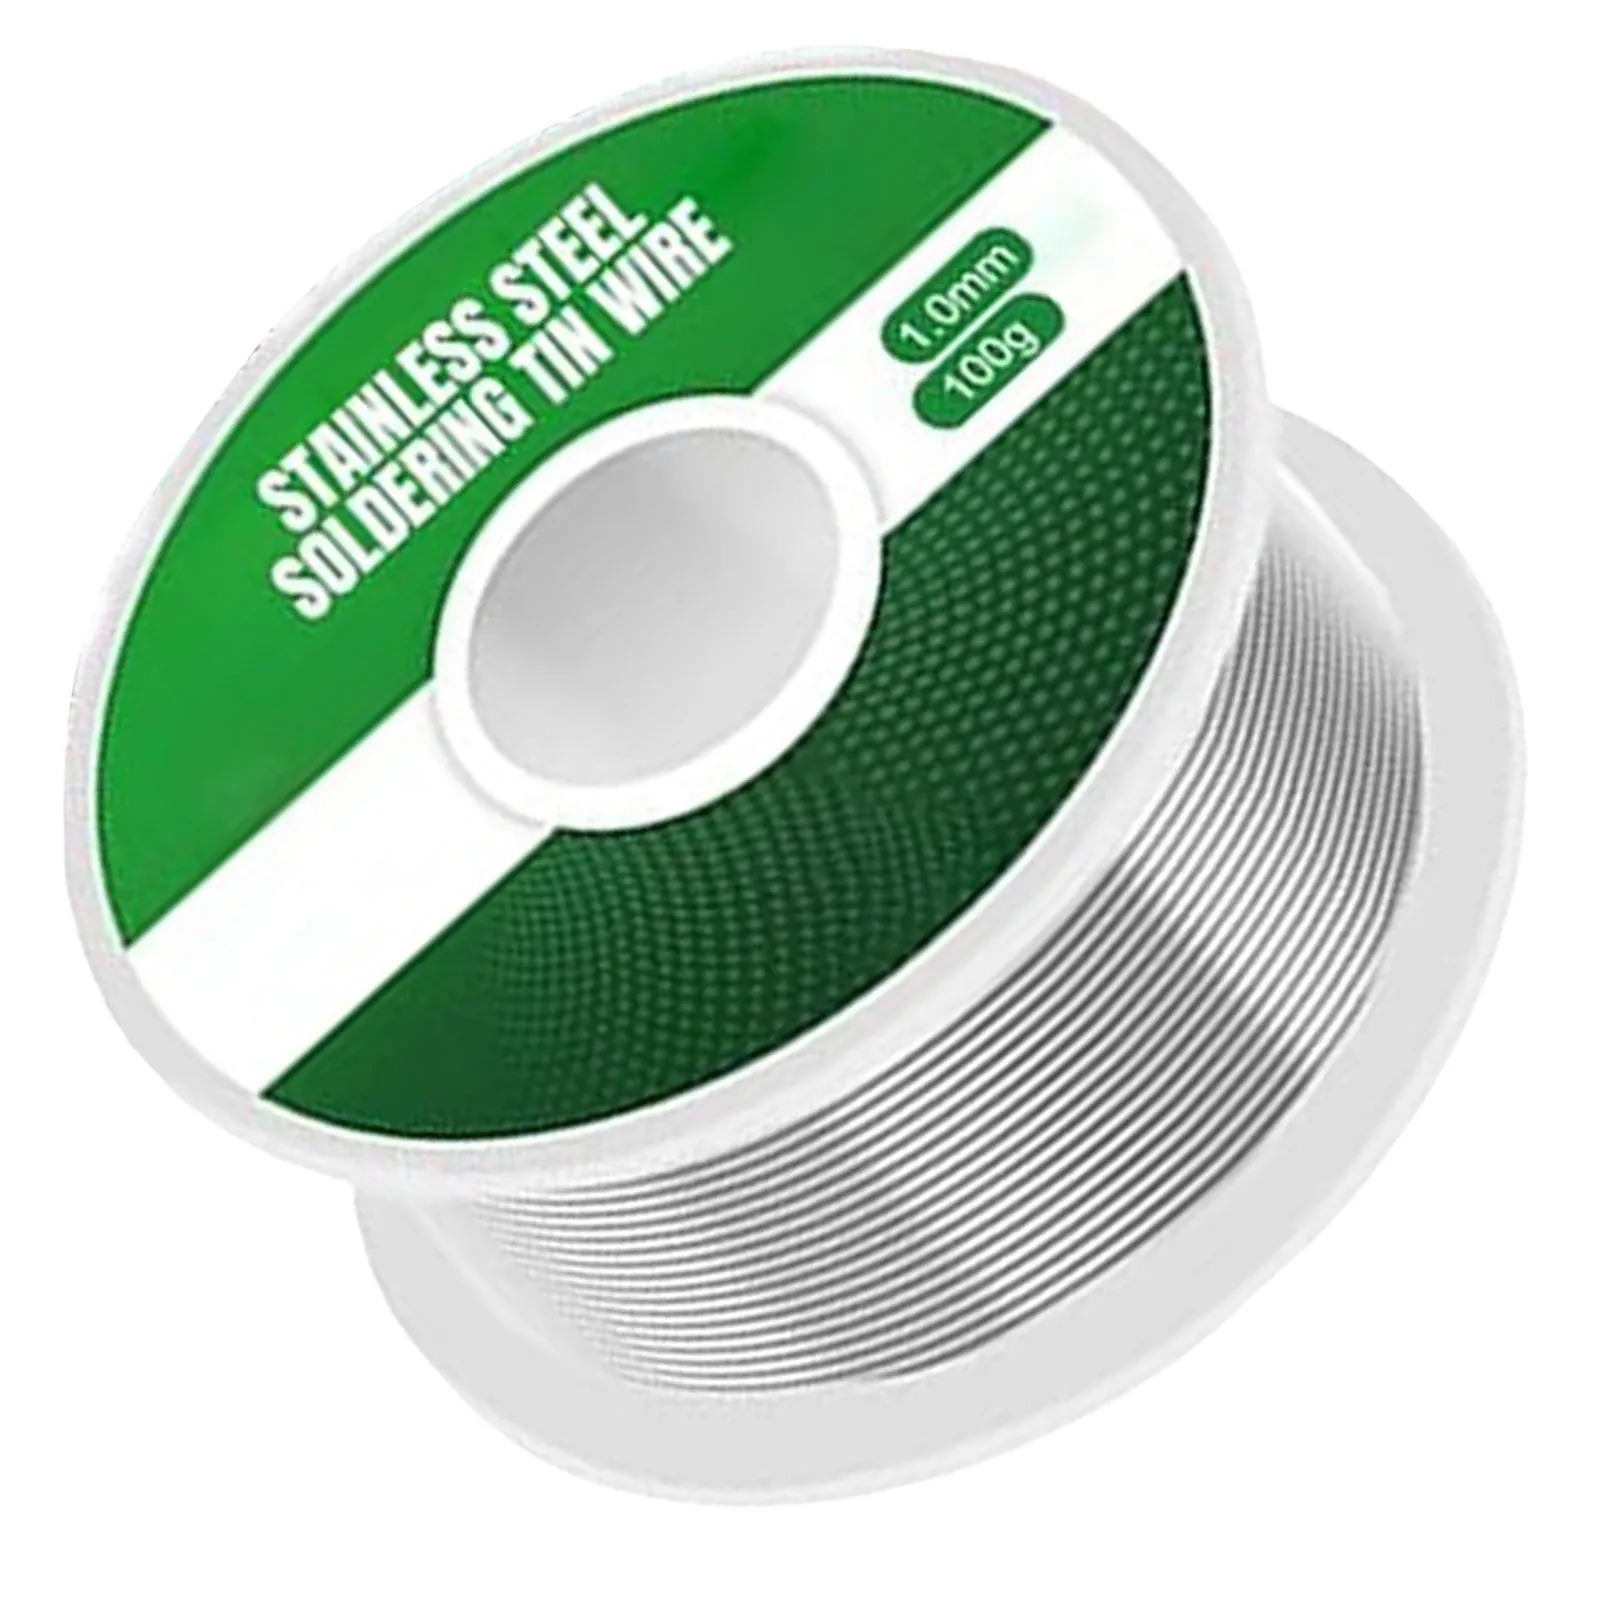 

Aluminum Stainless Steel Solder Wire Firm and Durable Tin Lead Core Solder Wire Suitable for Copper Plates